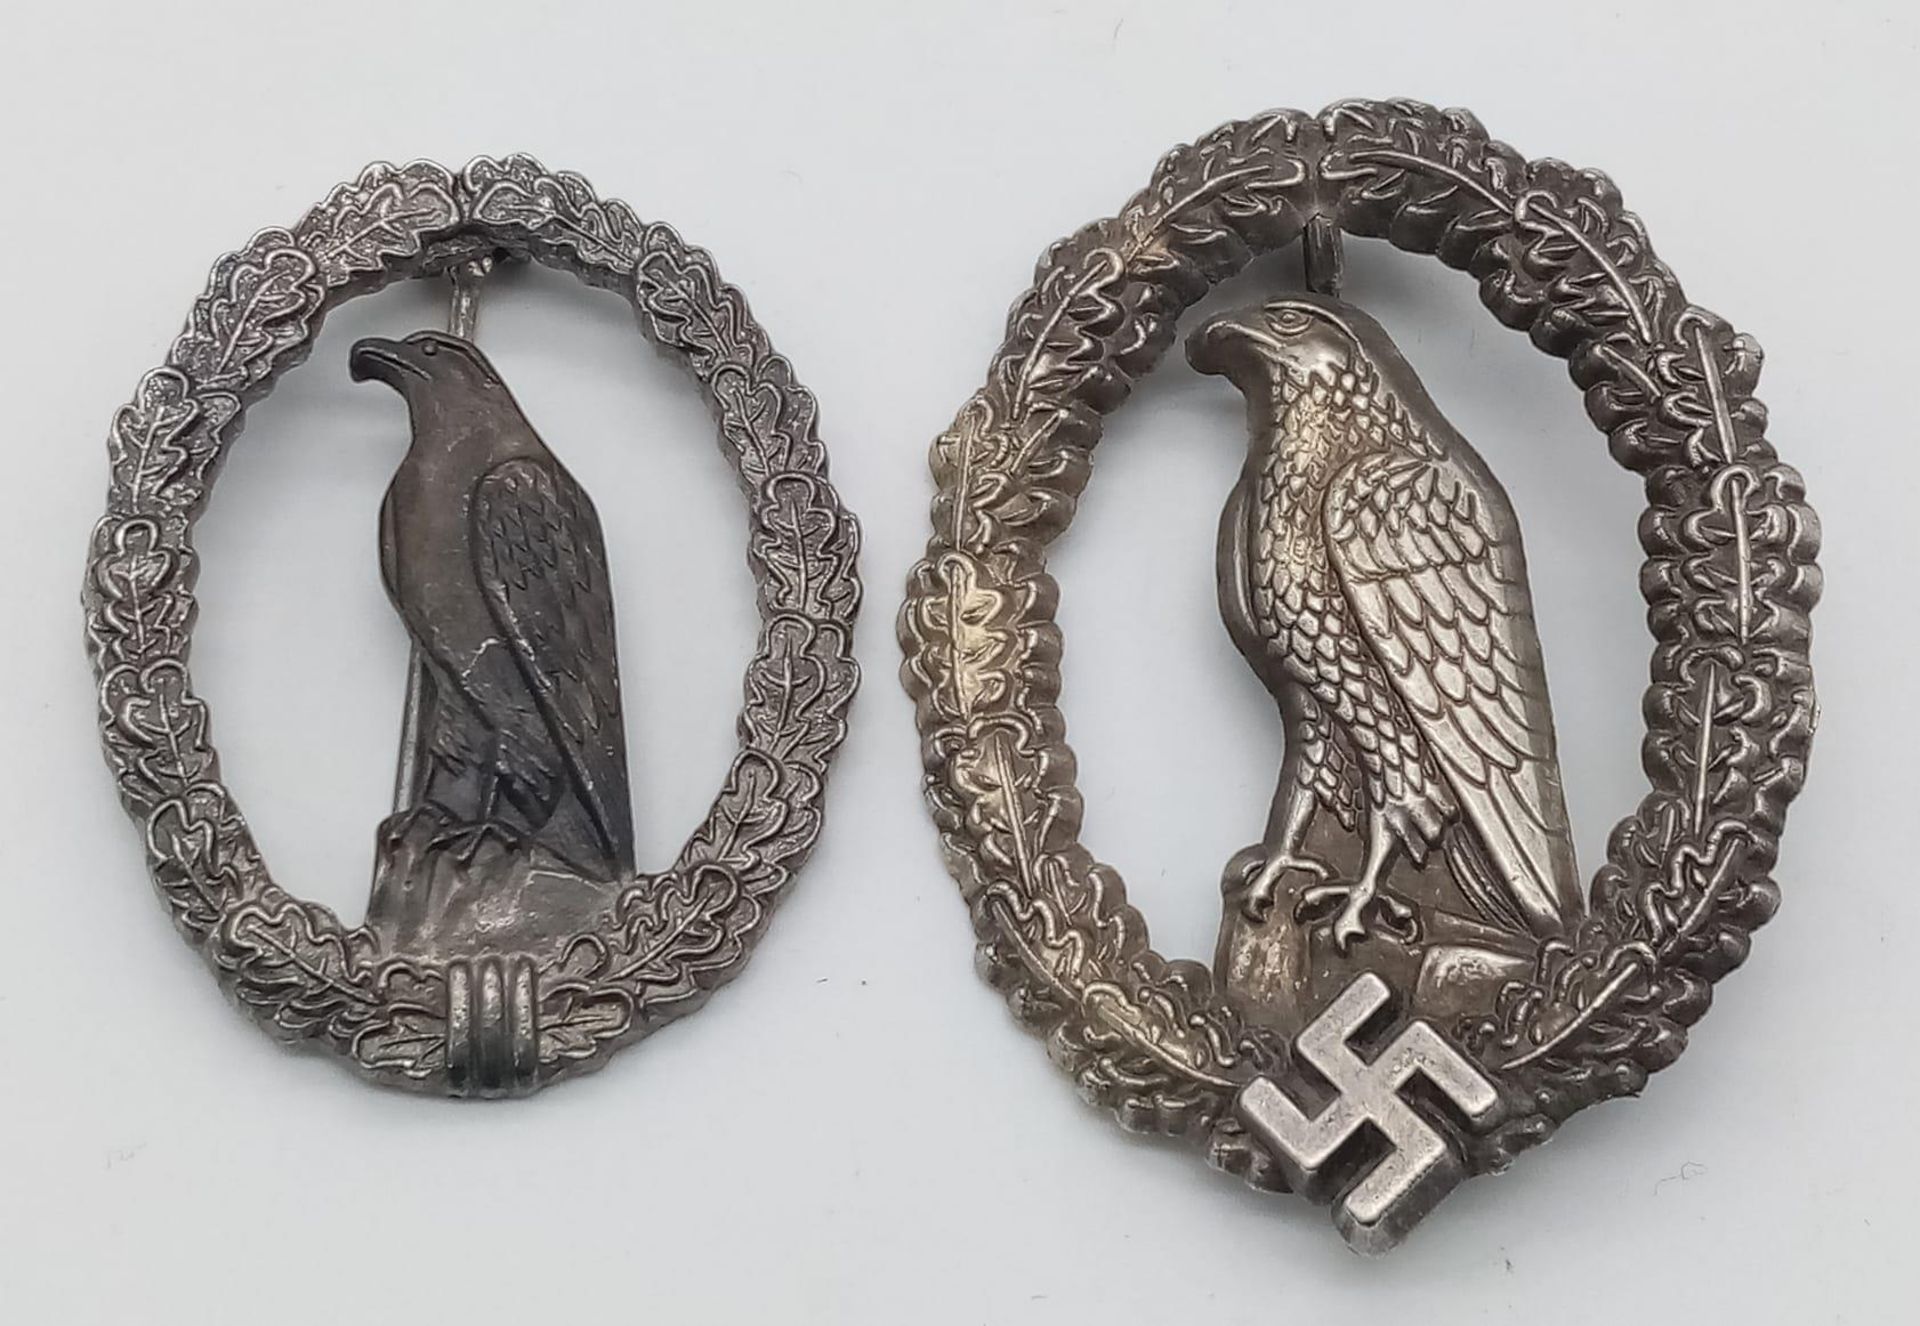 WW2 German Retired Pilots Badge with a smaller 1957 version without the Swastika, so it could be